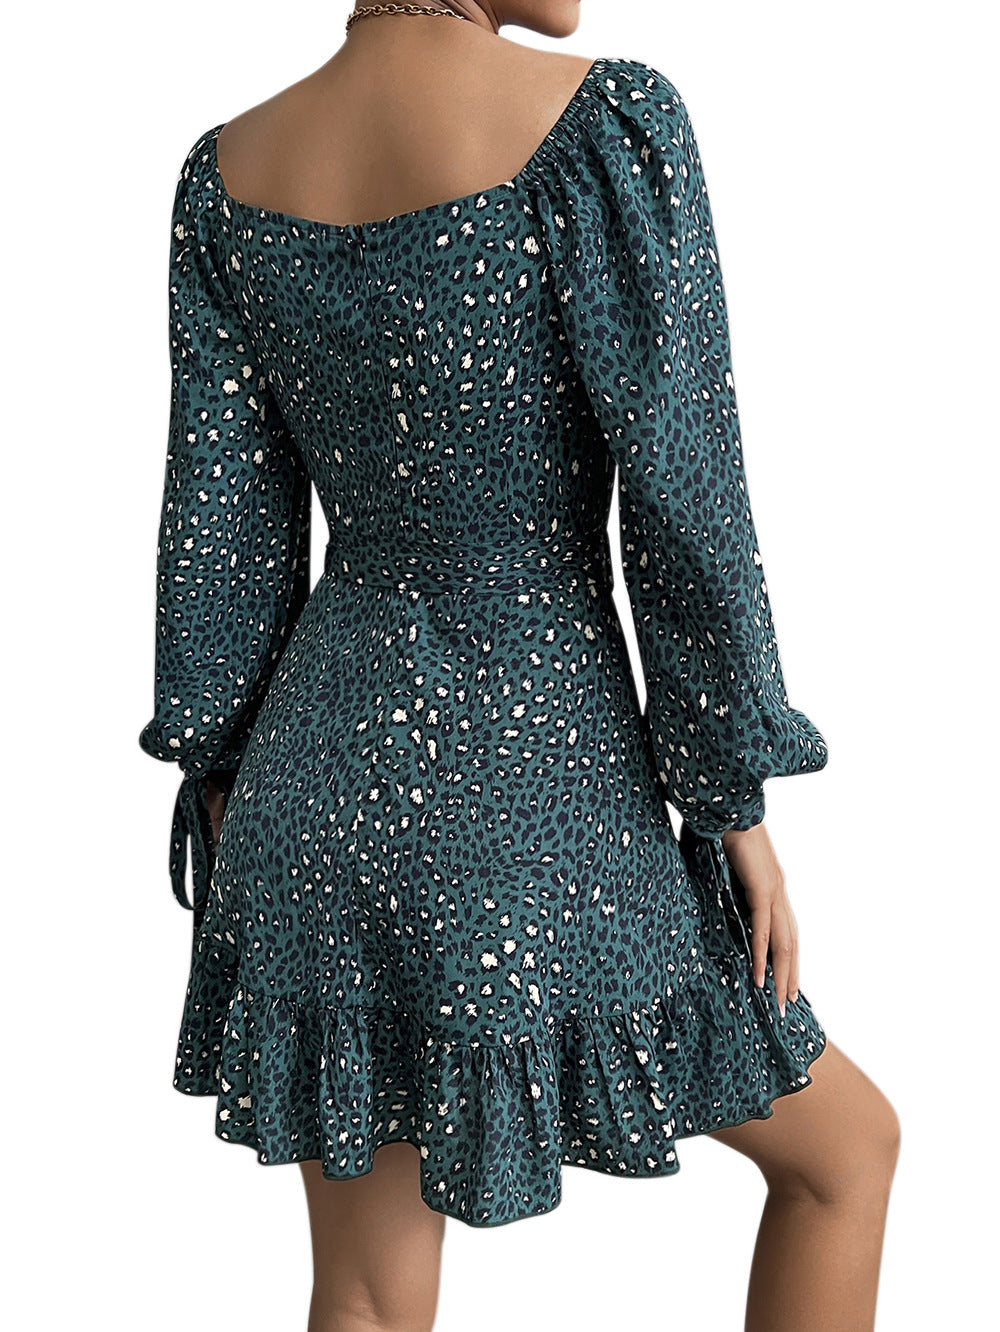 YESFASHION New V-neck Sequins Lace-up Skirt Long-sleeved Dress